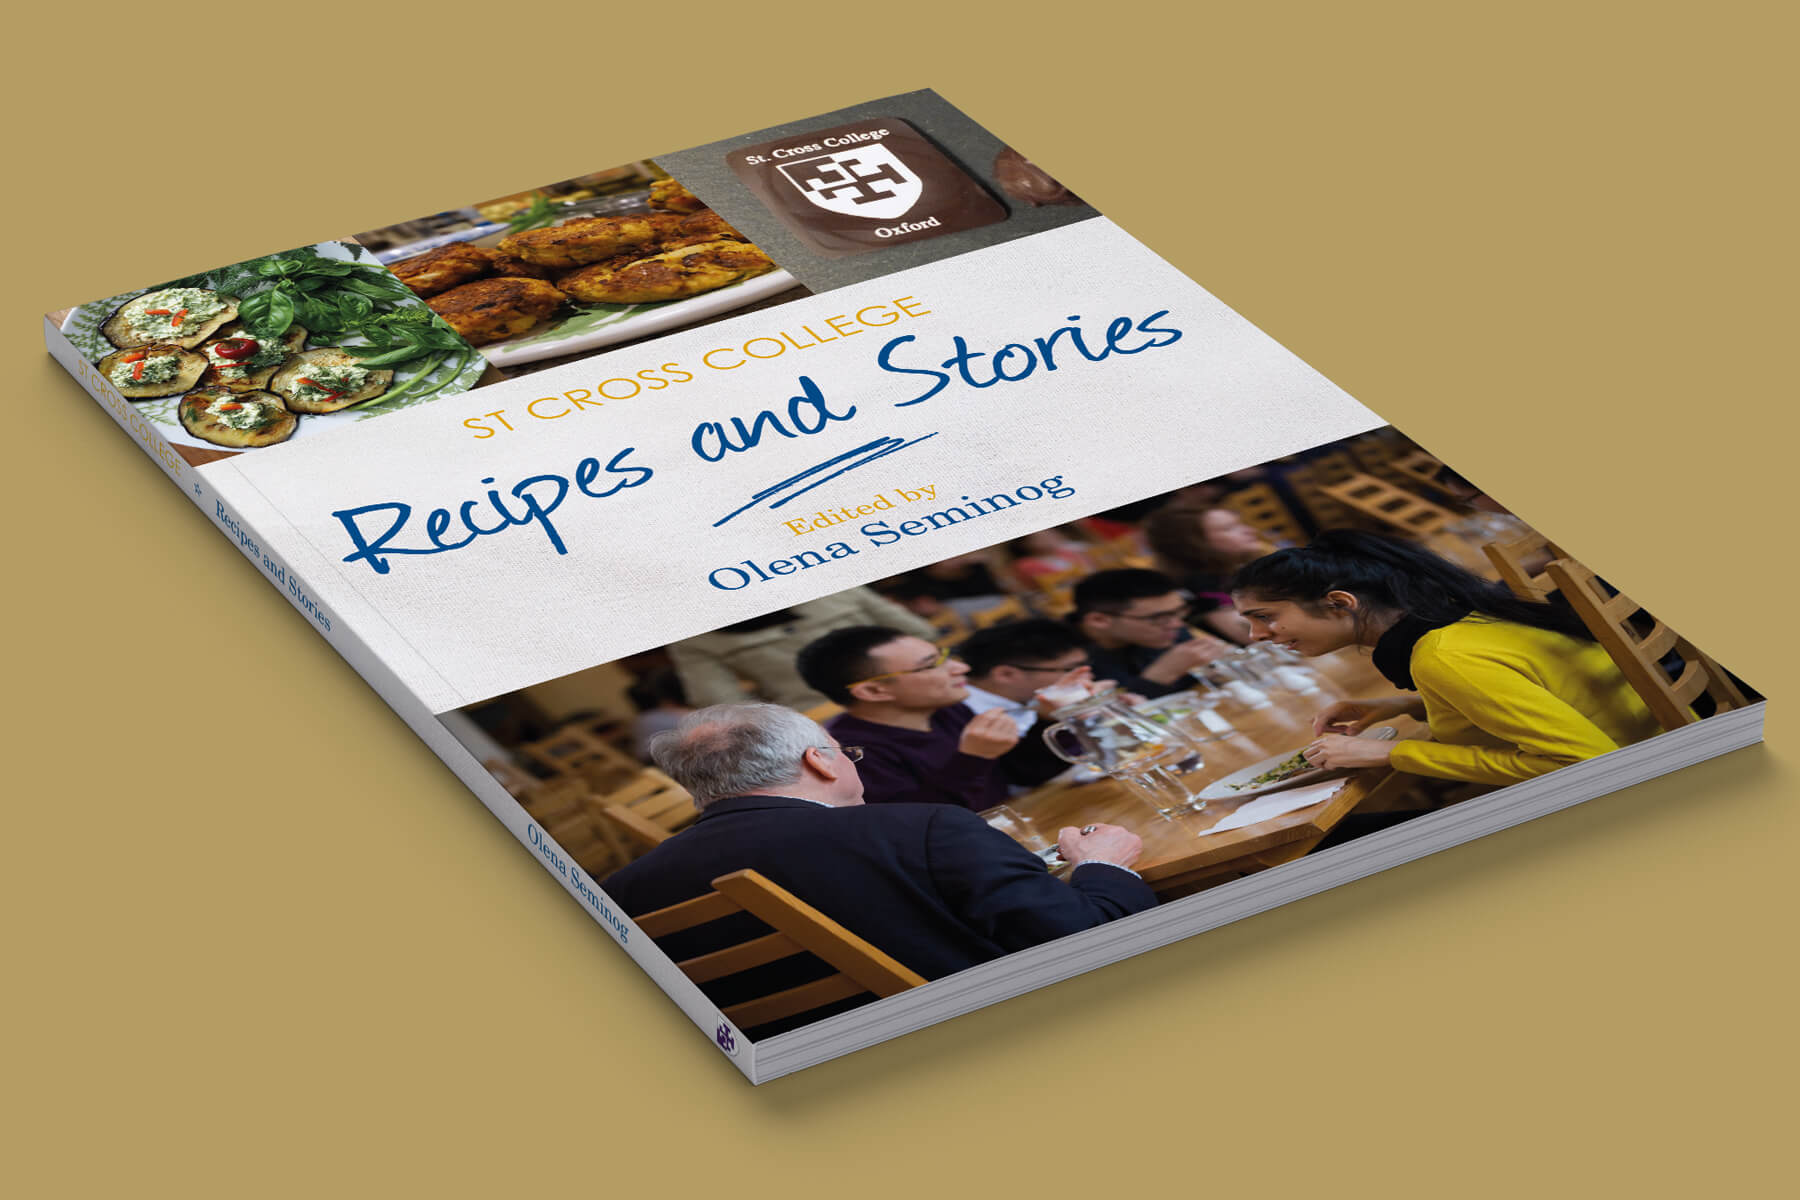 Recipe book printed for St Cross College, Oxford